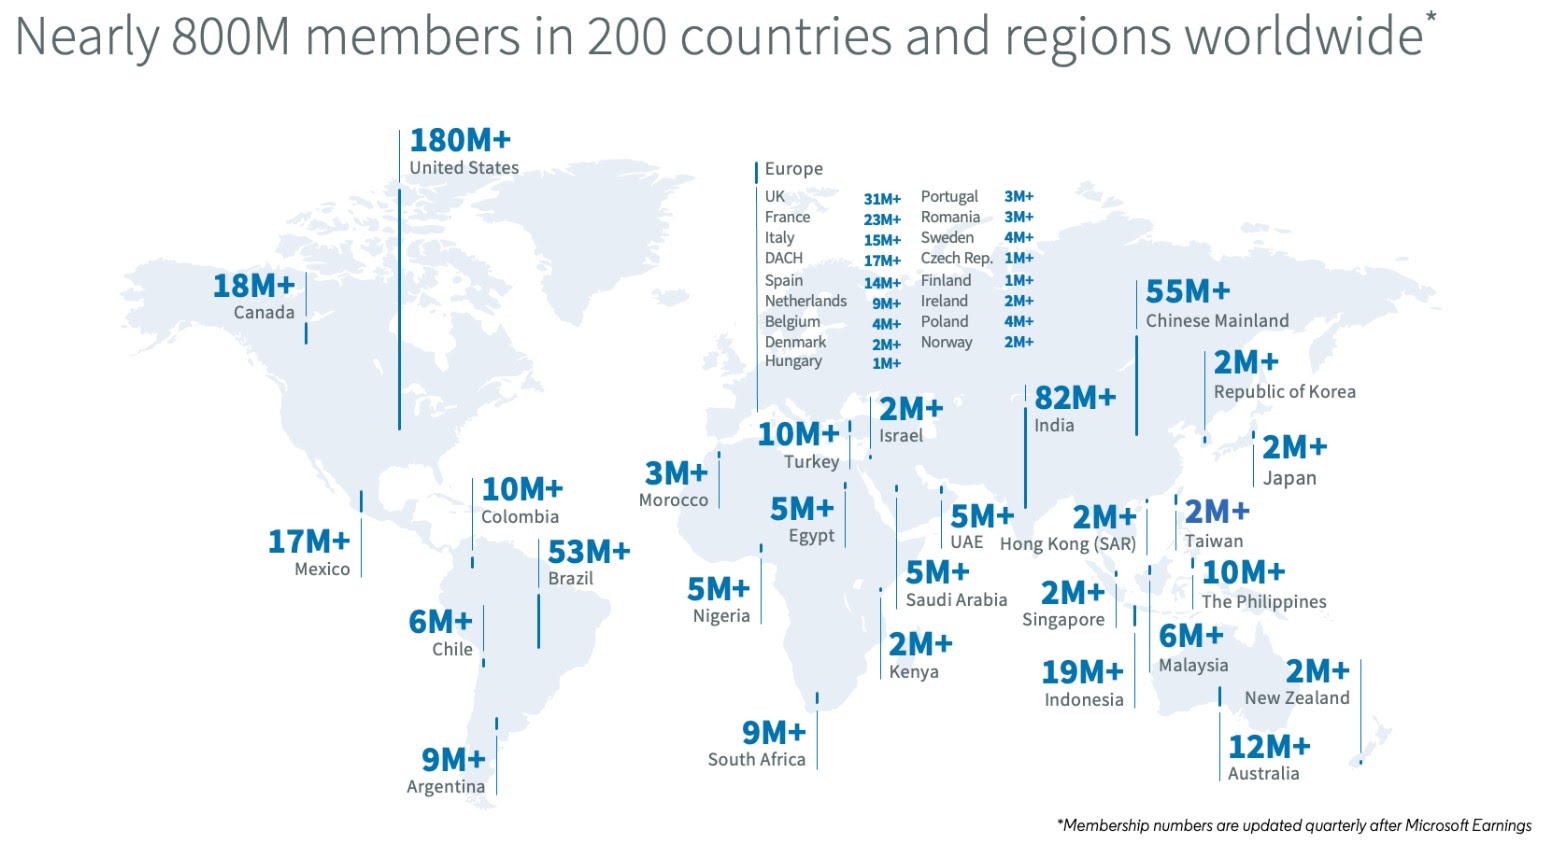 illustration depicting the number of linkedin users in different countries and regions